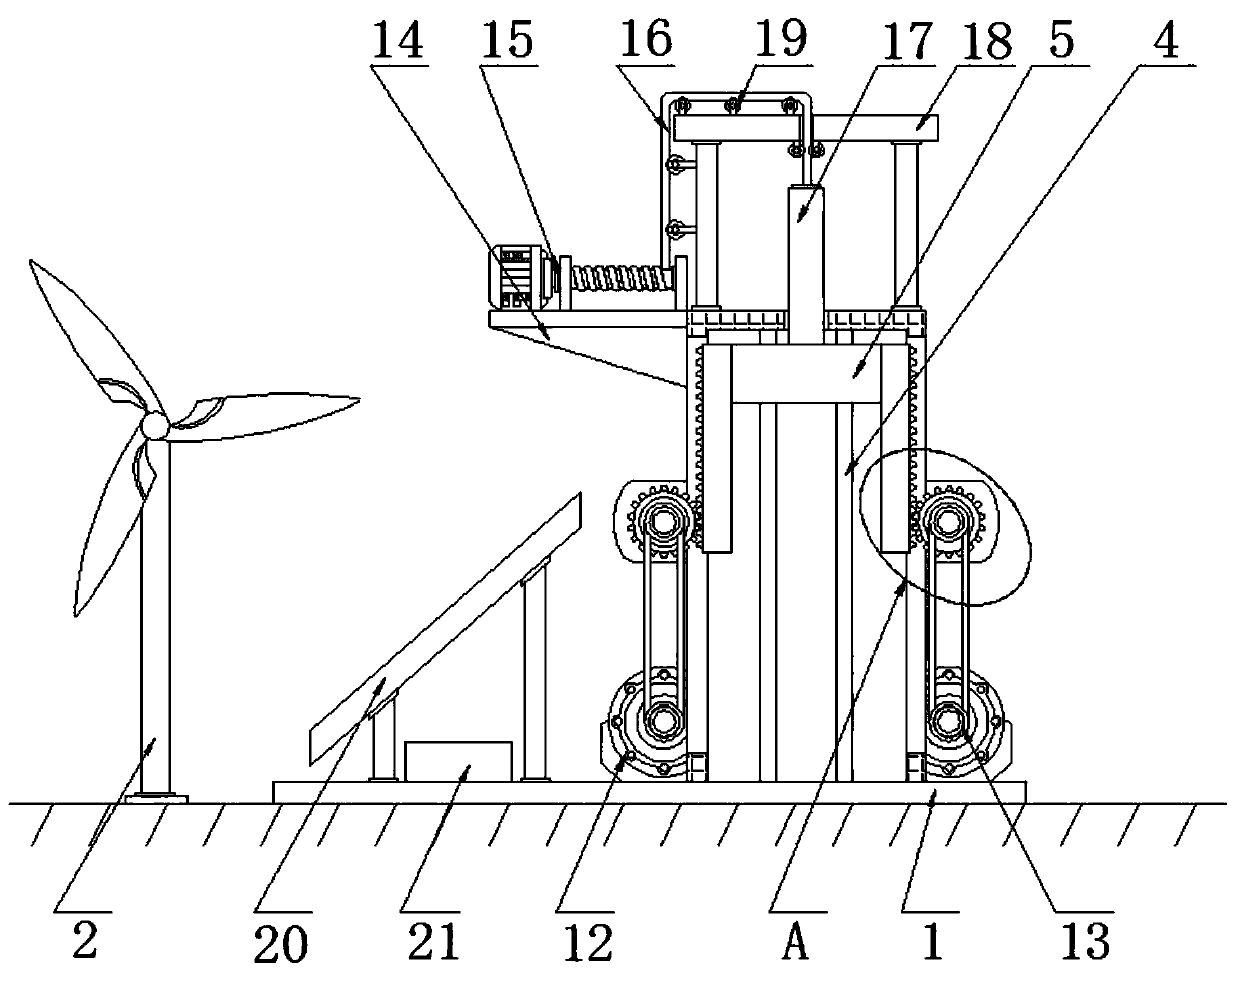 Gravity potential energy storage and power generation system